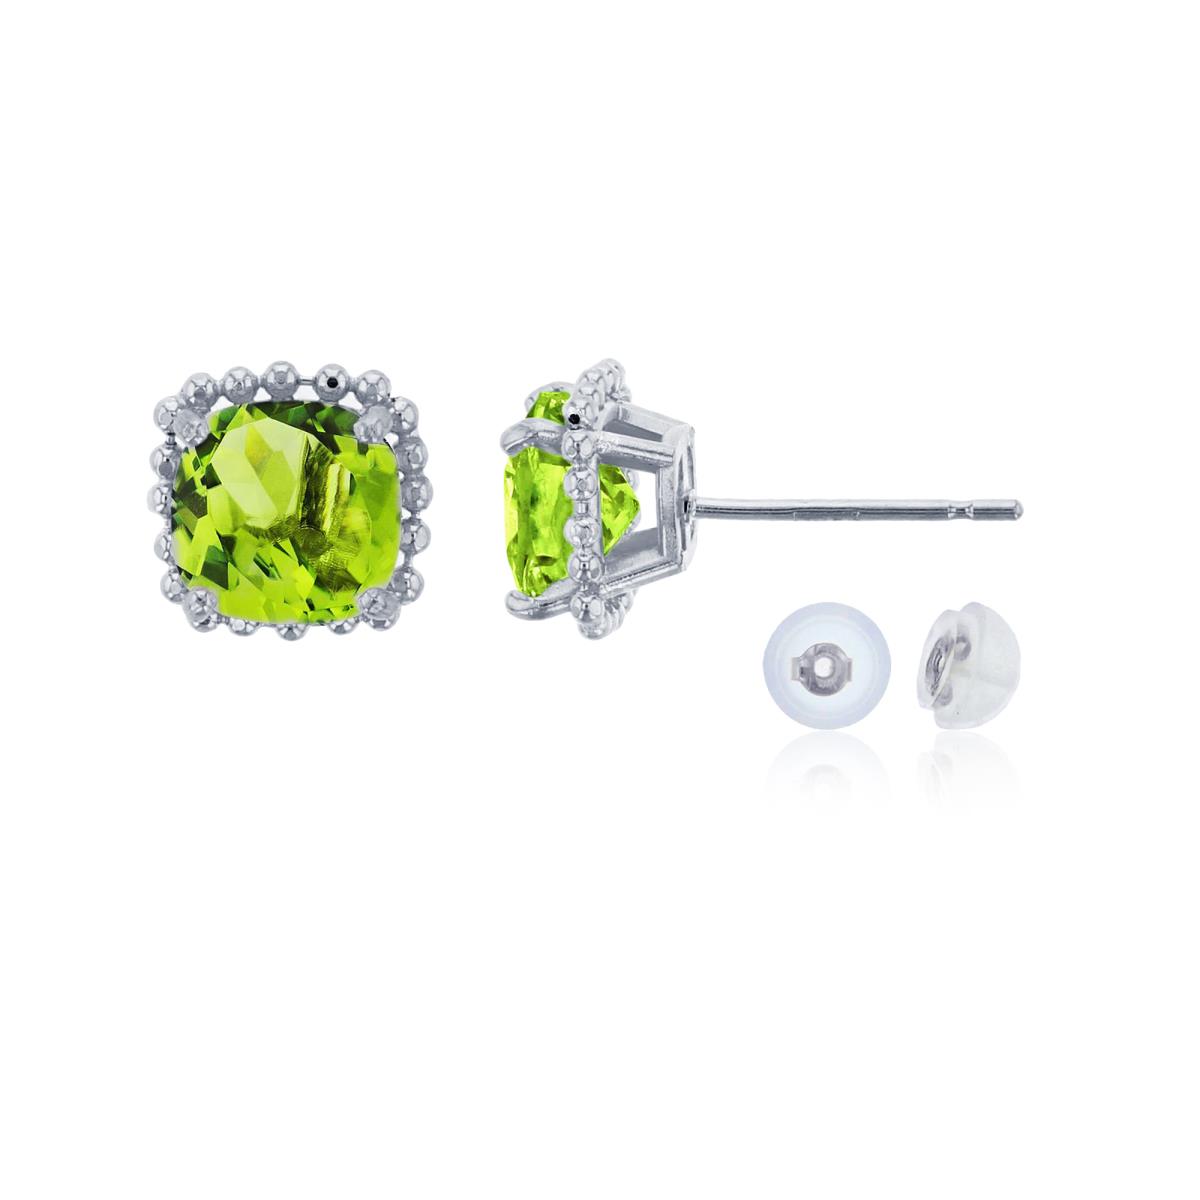 10K White Gold 6x6mm Cushion Cut Peridot Bead Frame Stud Earring with Silicone Back